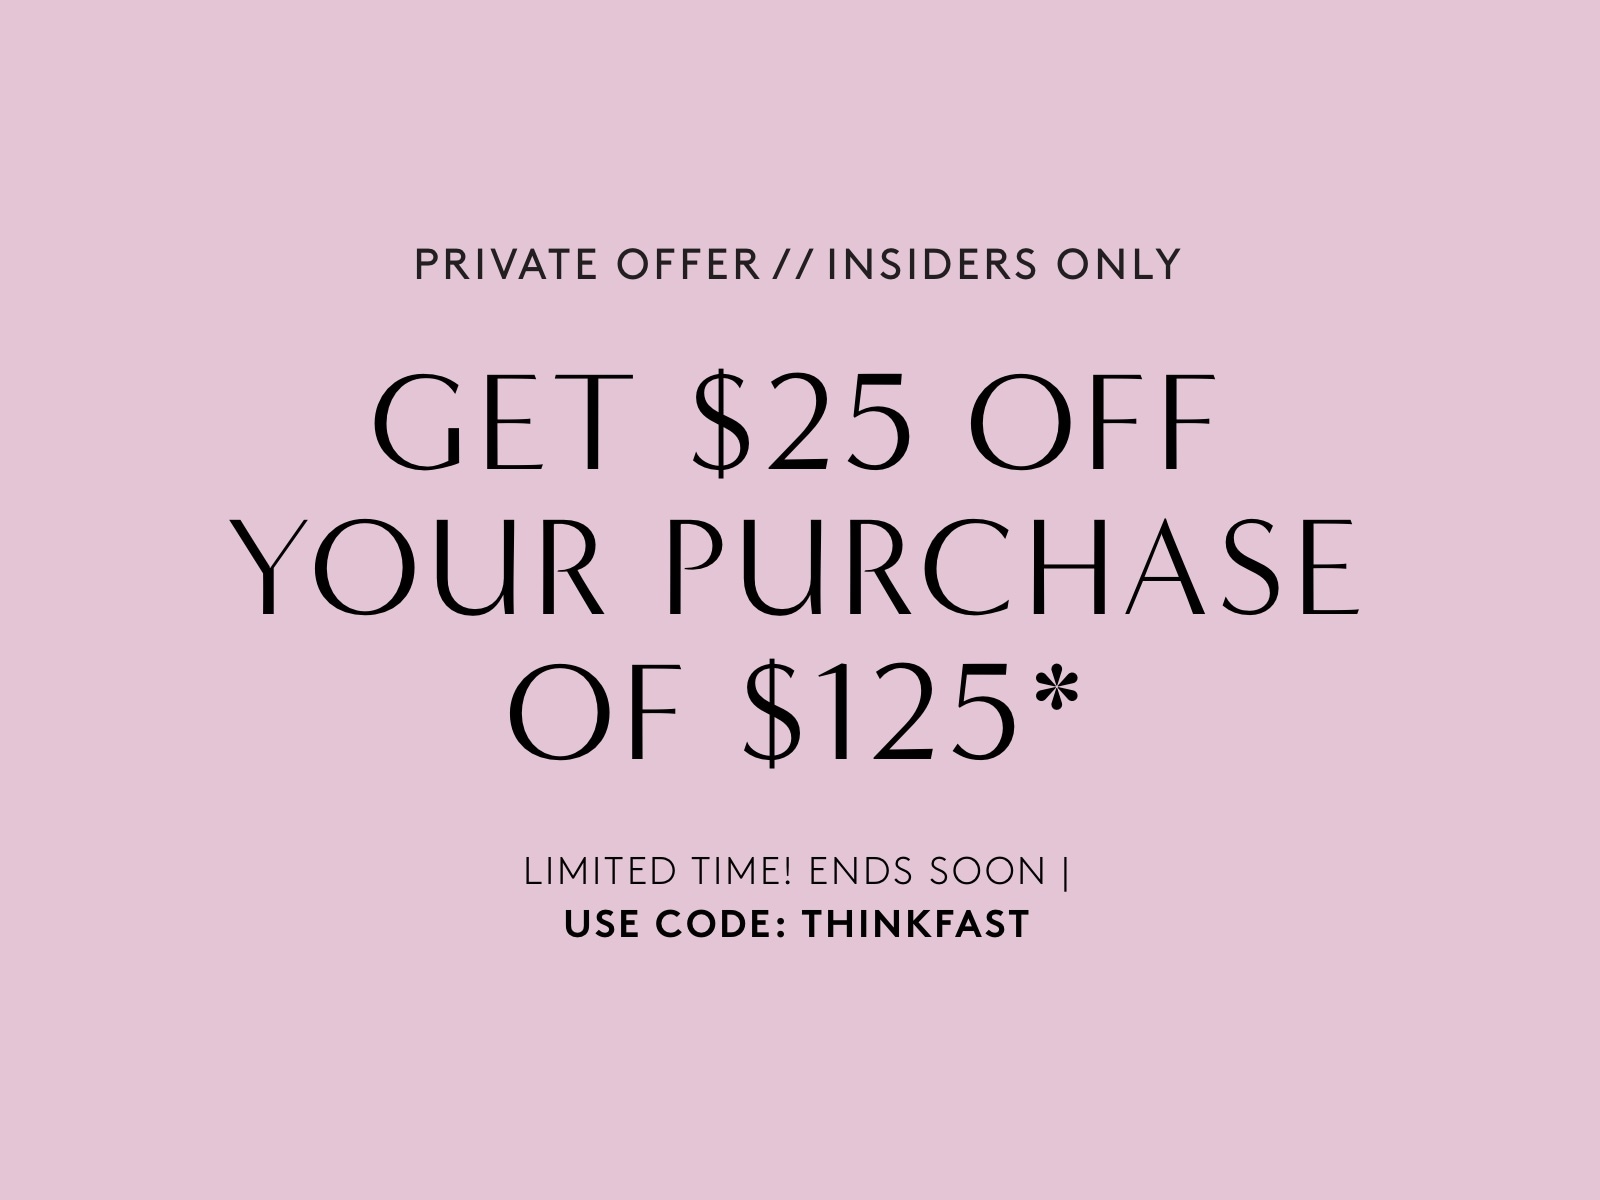 Insiders only! Get $25 off your purchase of $125 with code: THINKFAST